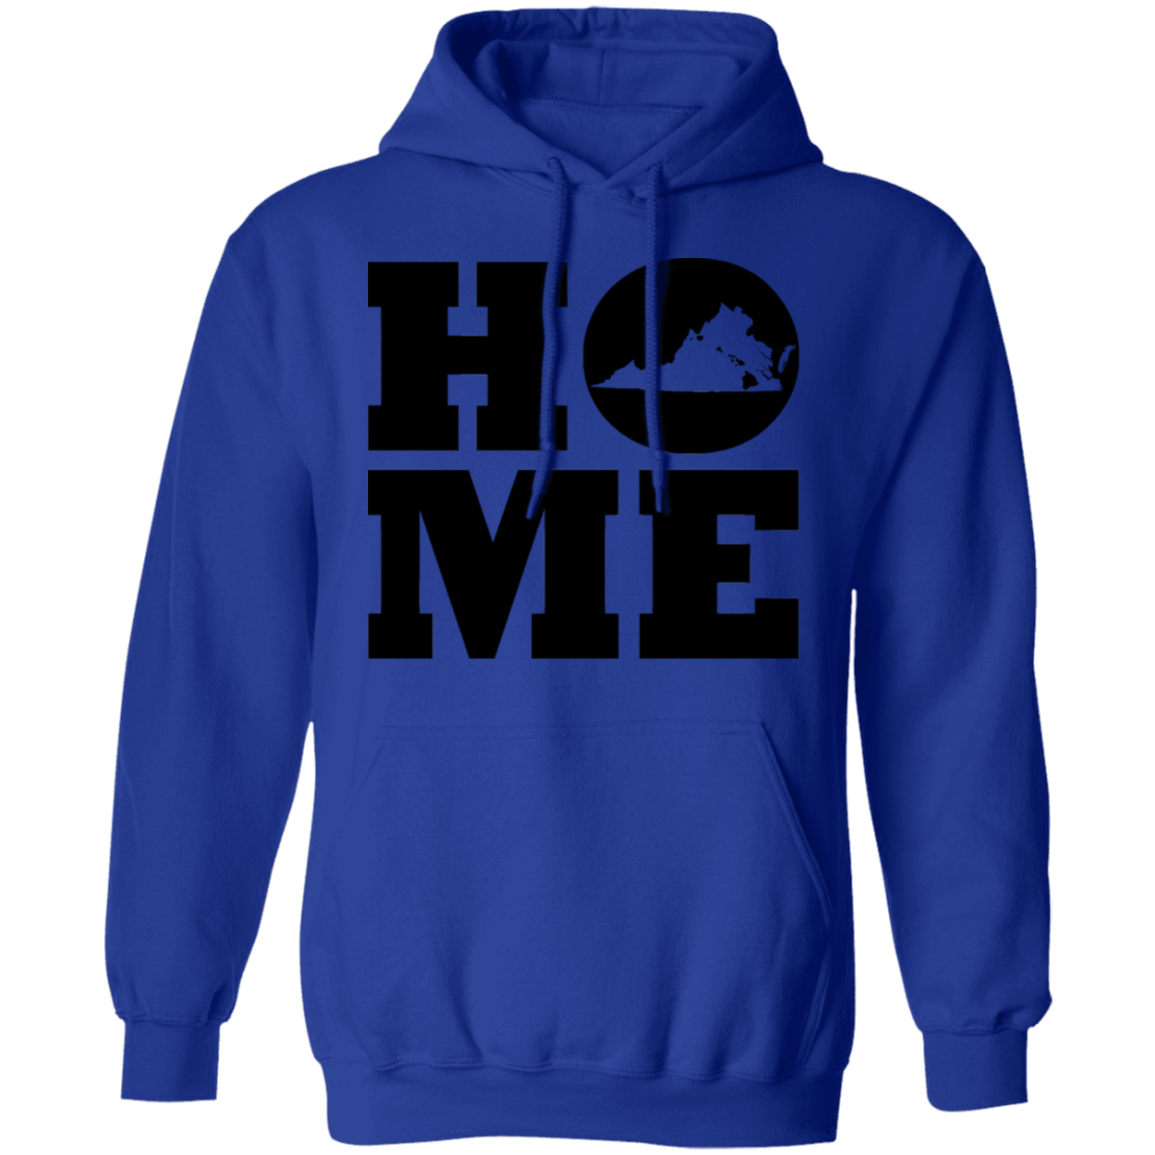 Home Roots Hawai'i and Virginia Pullover Hoodie